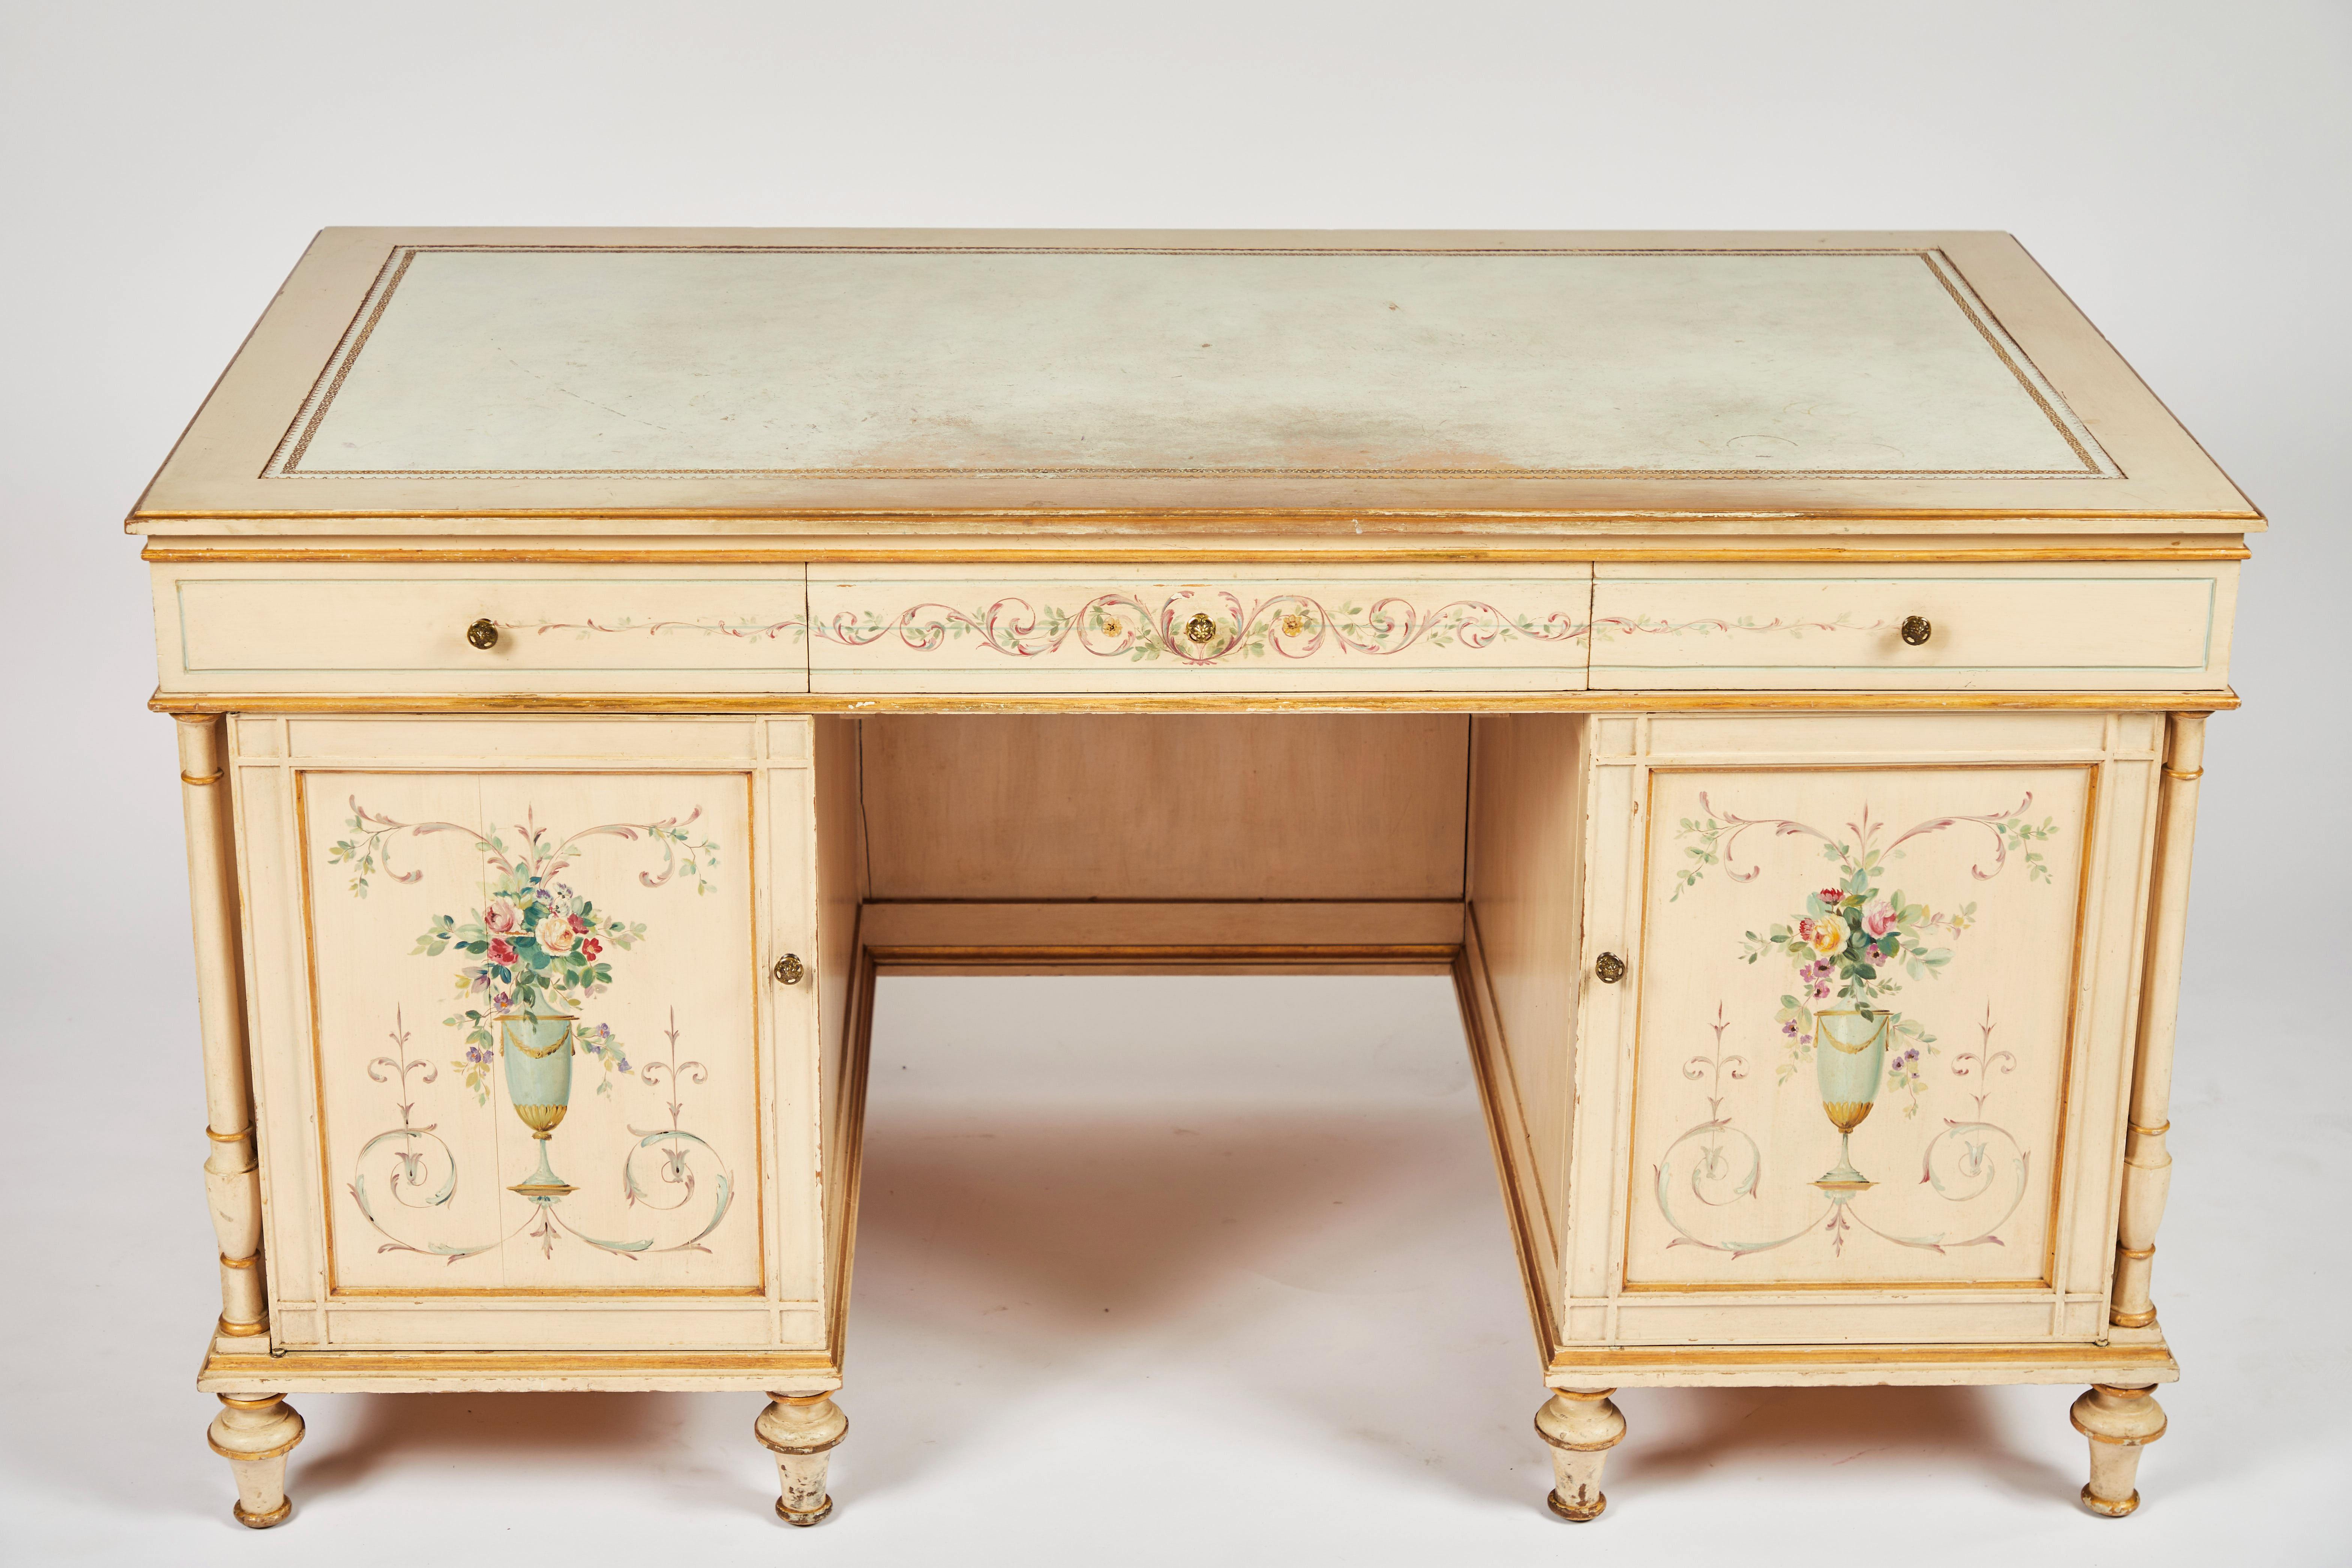 1930s hand painted desk in the Continental style
Leather inset top with gilded edge details.
Provenance - childhood desk of JP Morgan's grand daughter, from an old Montecito estate.